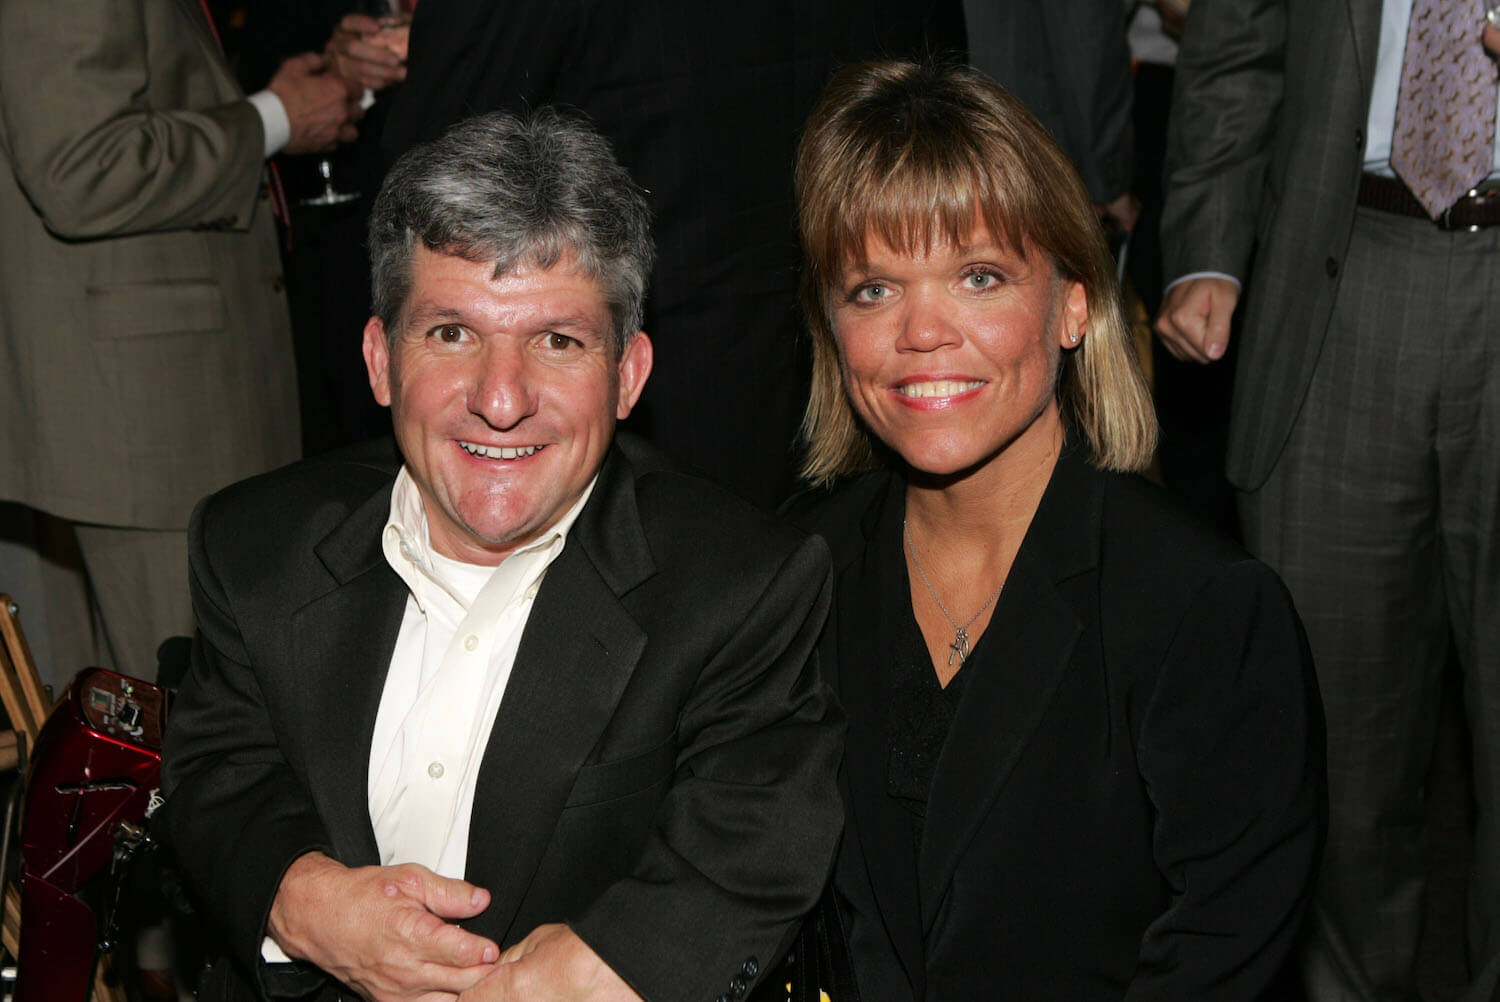 Matt and Amy Roloff from 'Little People, Big World' smiling while against a black background